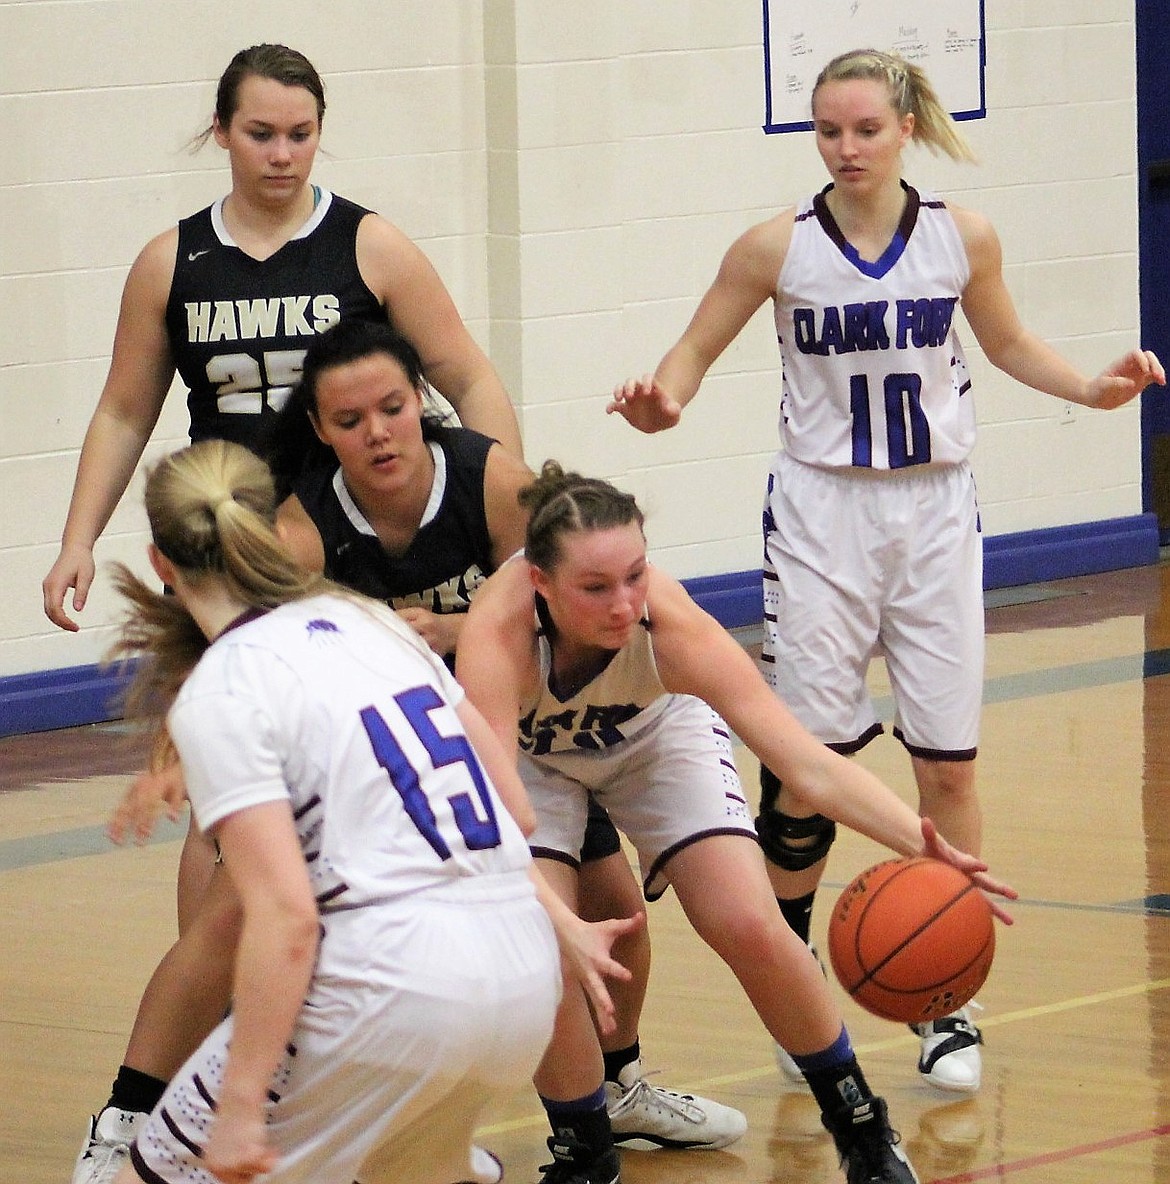 Top-ranked Lady Cats and the Blackhawks had a matchup on Friday night in Superior during Senior Night. Cats lost 50-28.